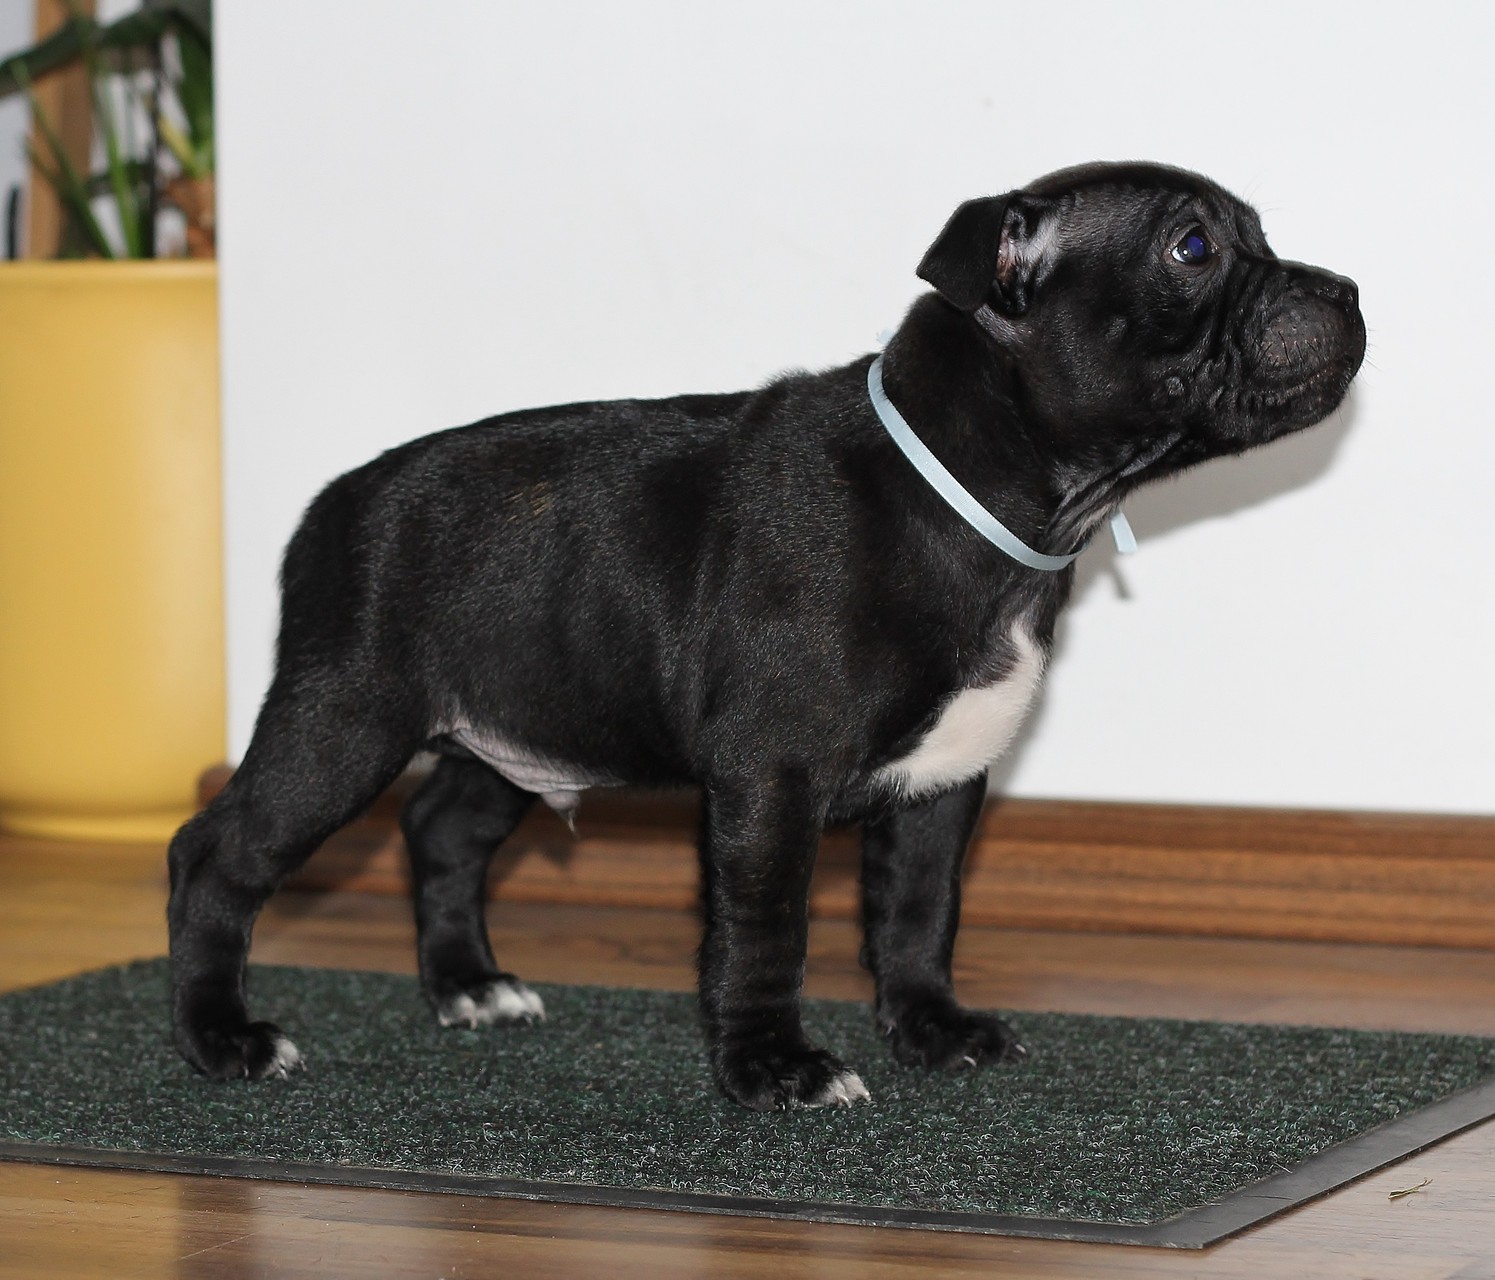 Gilroy 9 weeks, available